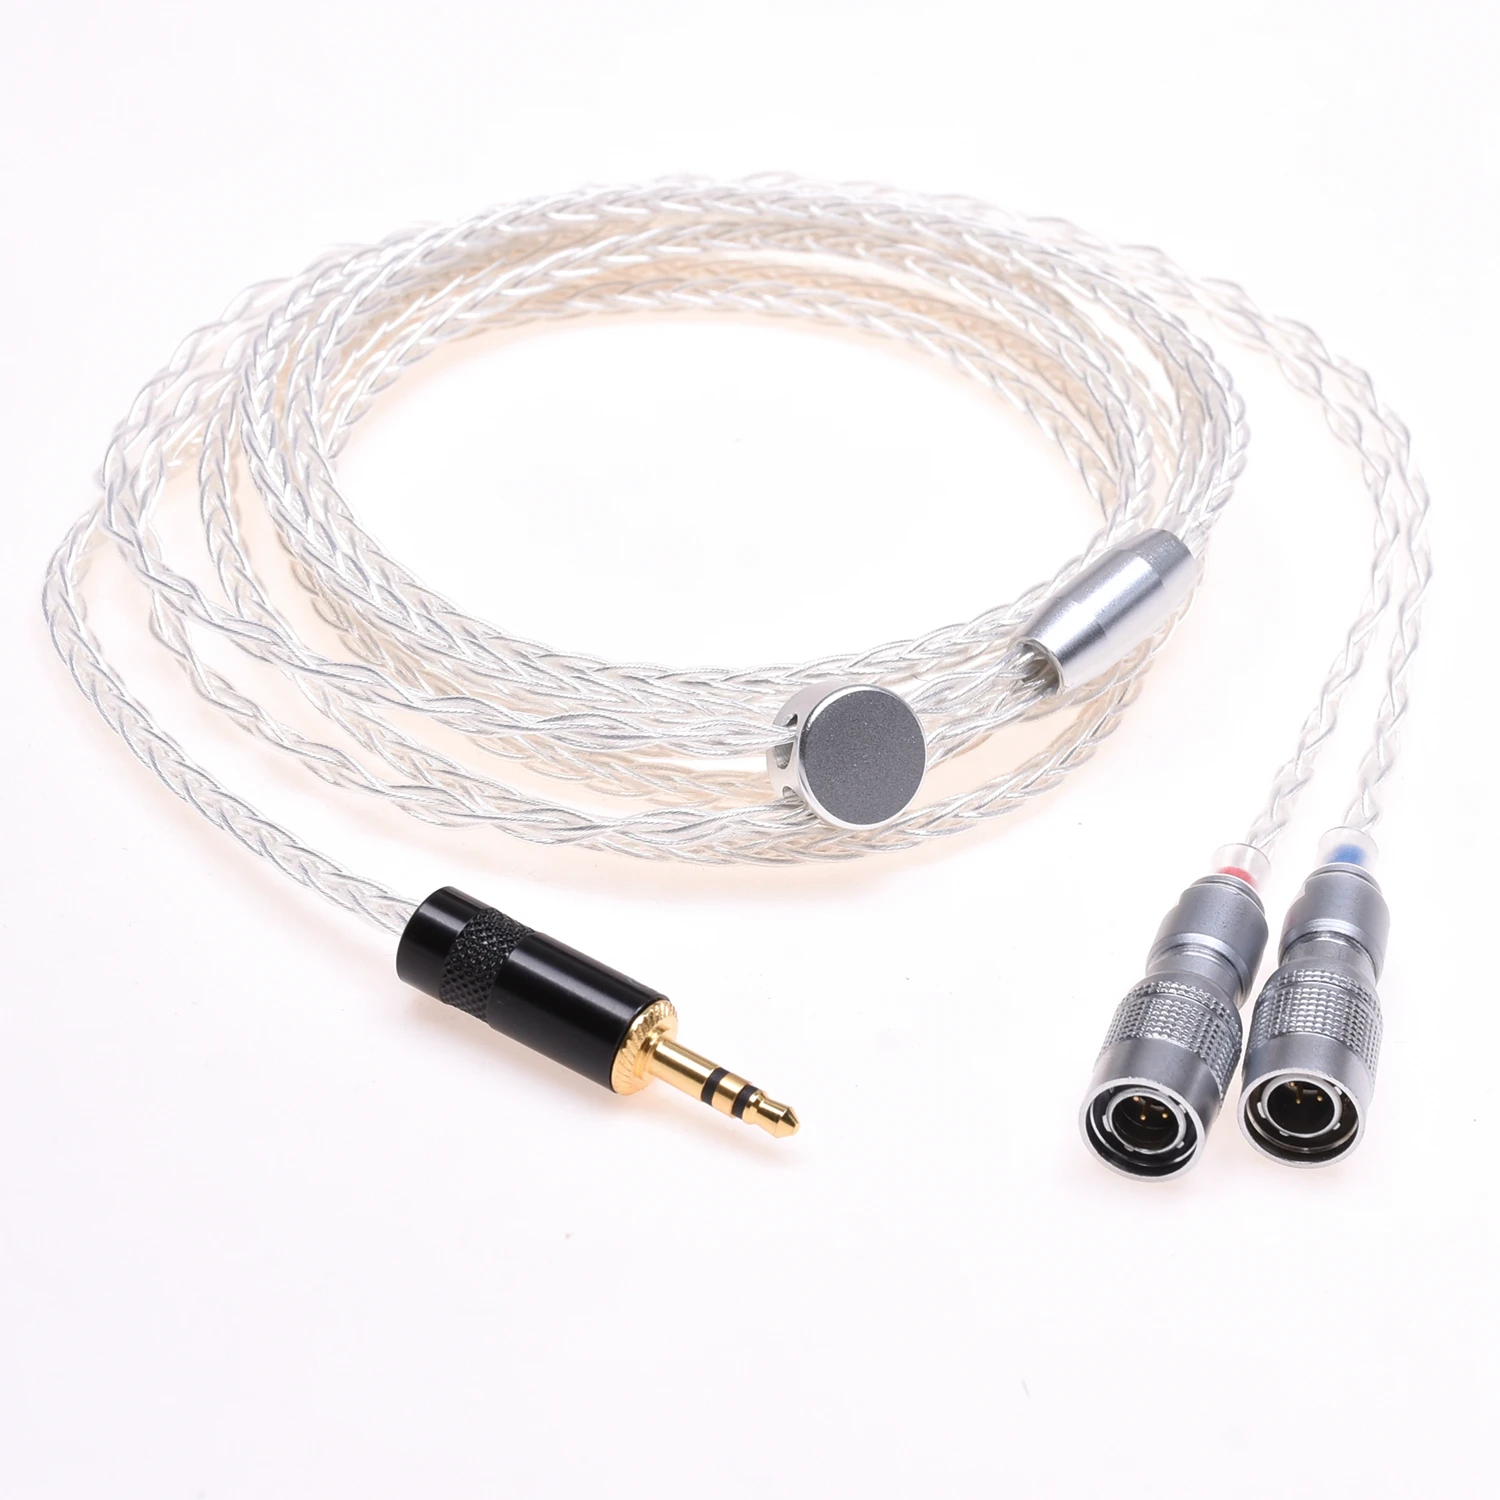 Audio Cable Headphone Upgrade Cable for Dan Clark Audio Mr Speakers Ether Alpha Dog Prime enlarge